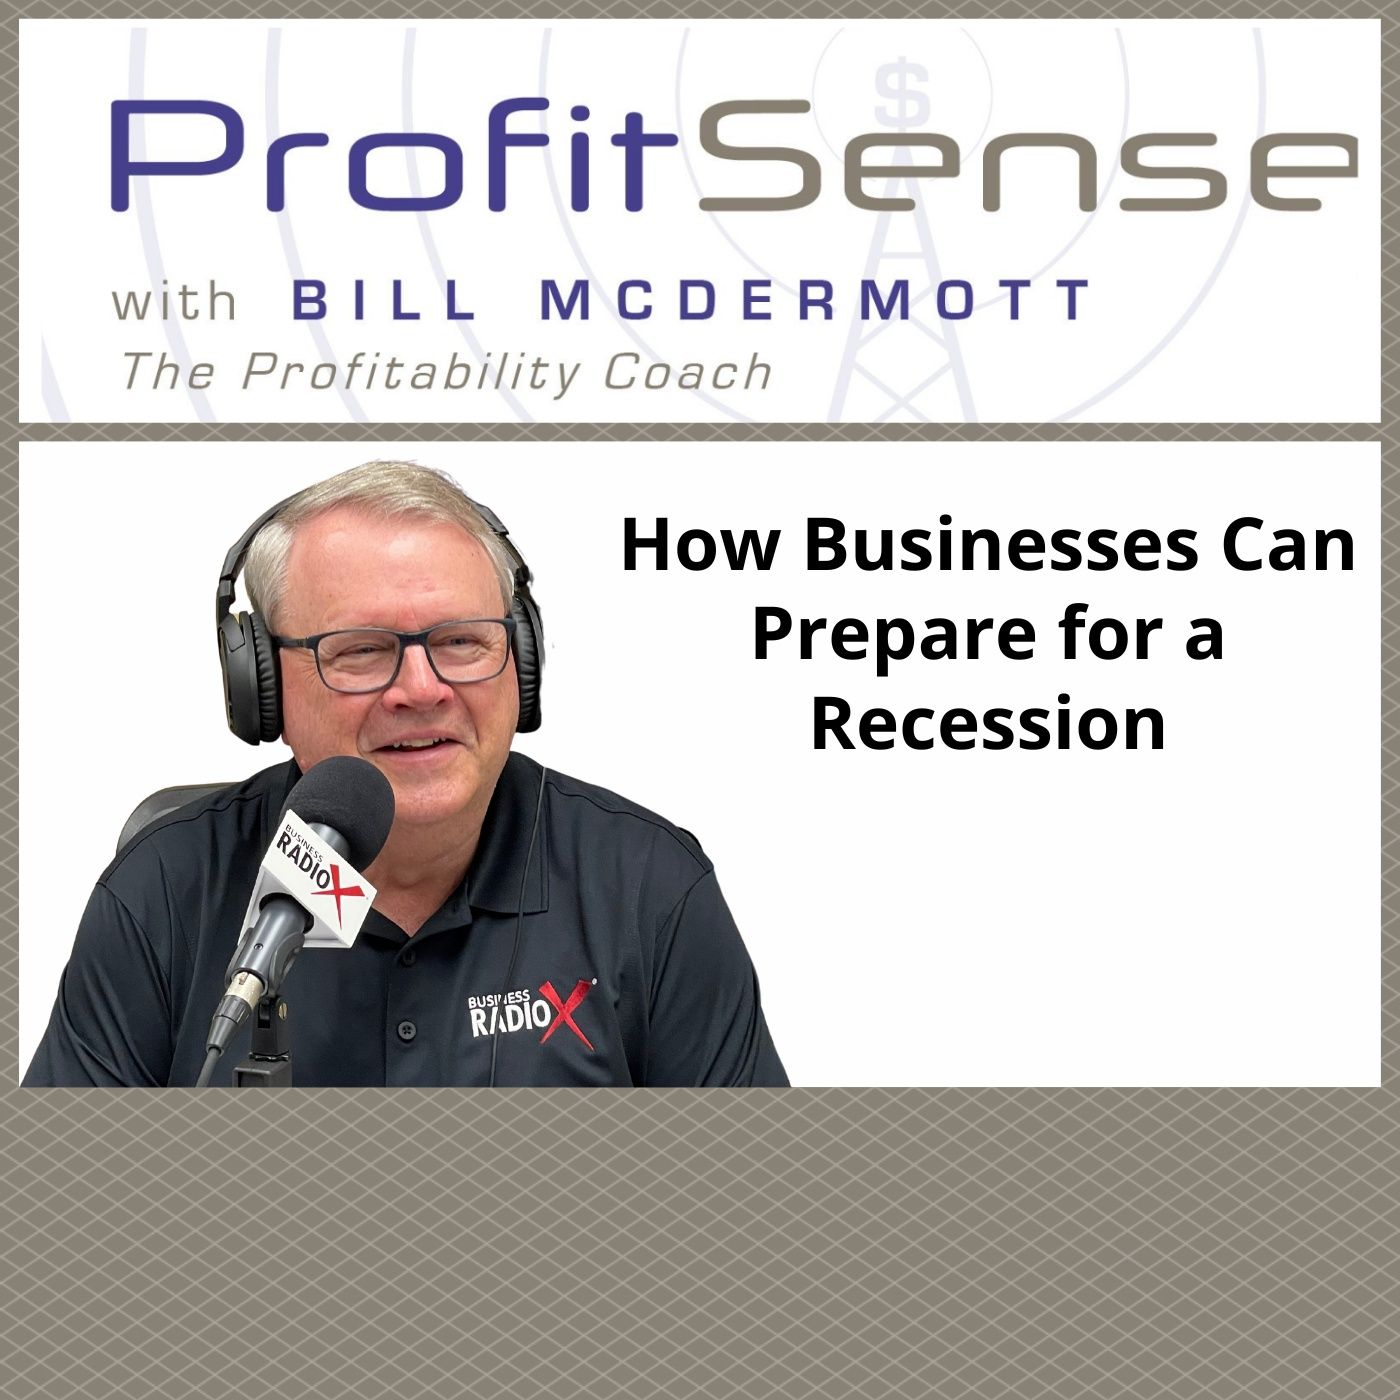 How Businesses Can Prepare for a Recession, with Bill McDermott, Host of ProfitSense